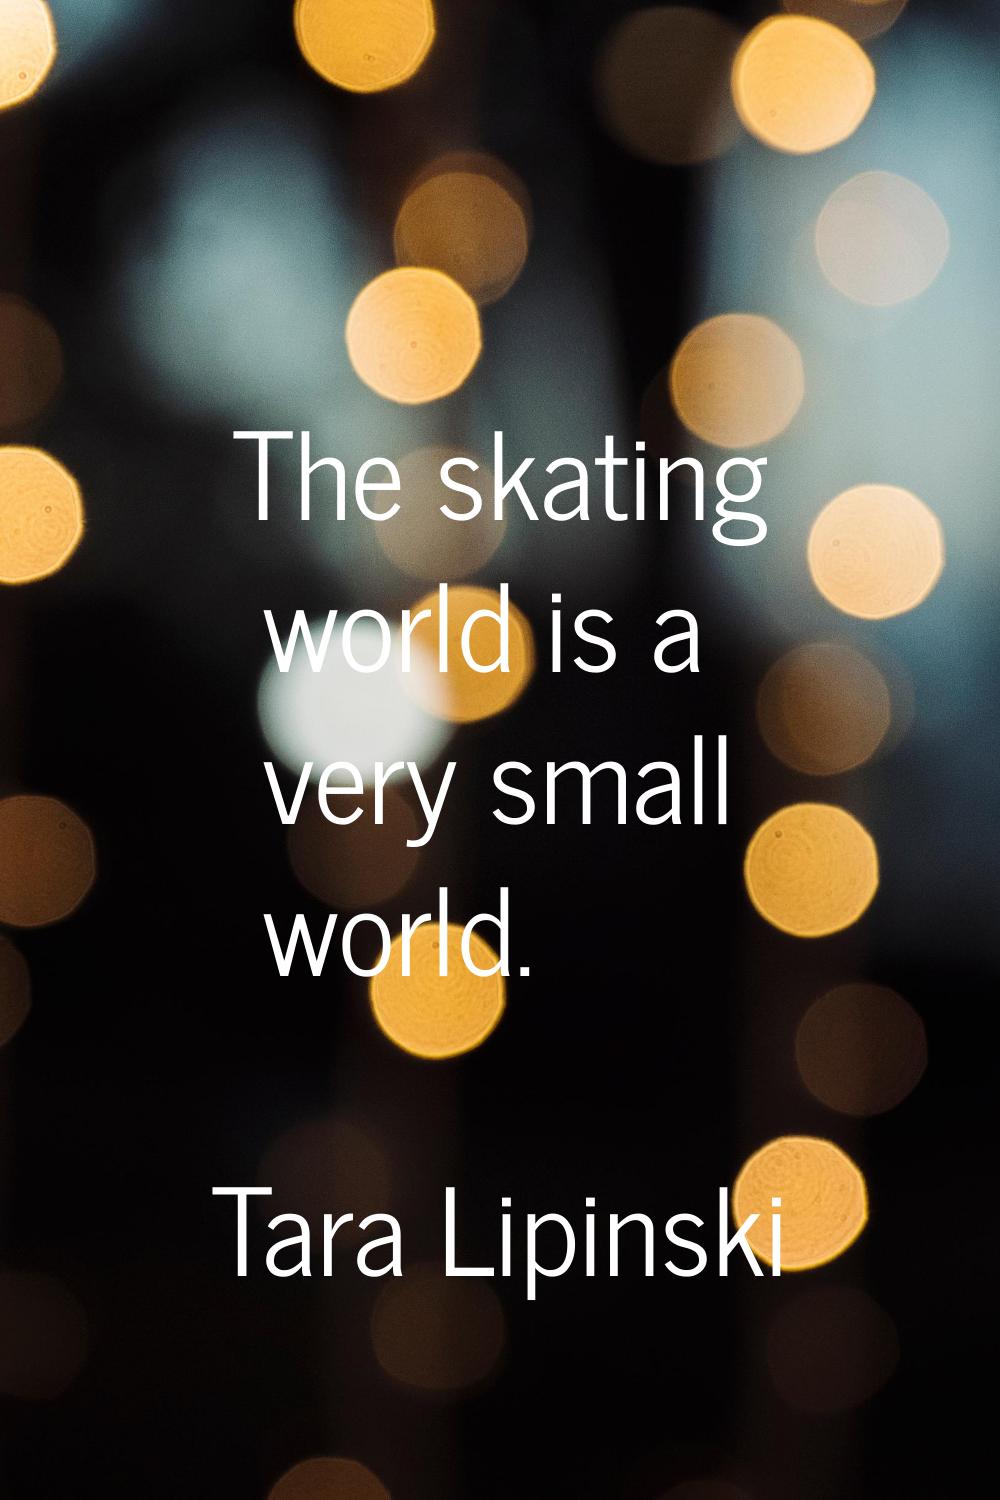 The skating world is a very small world.